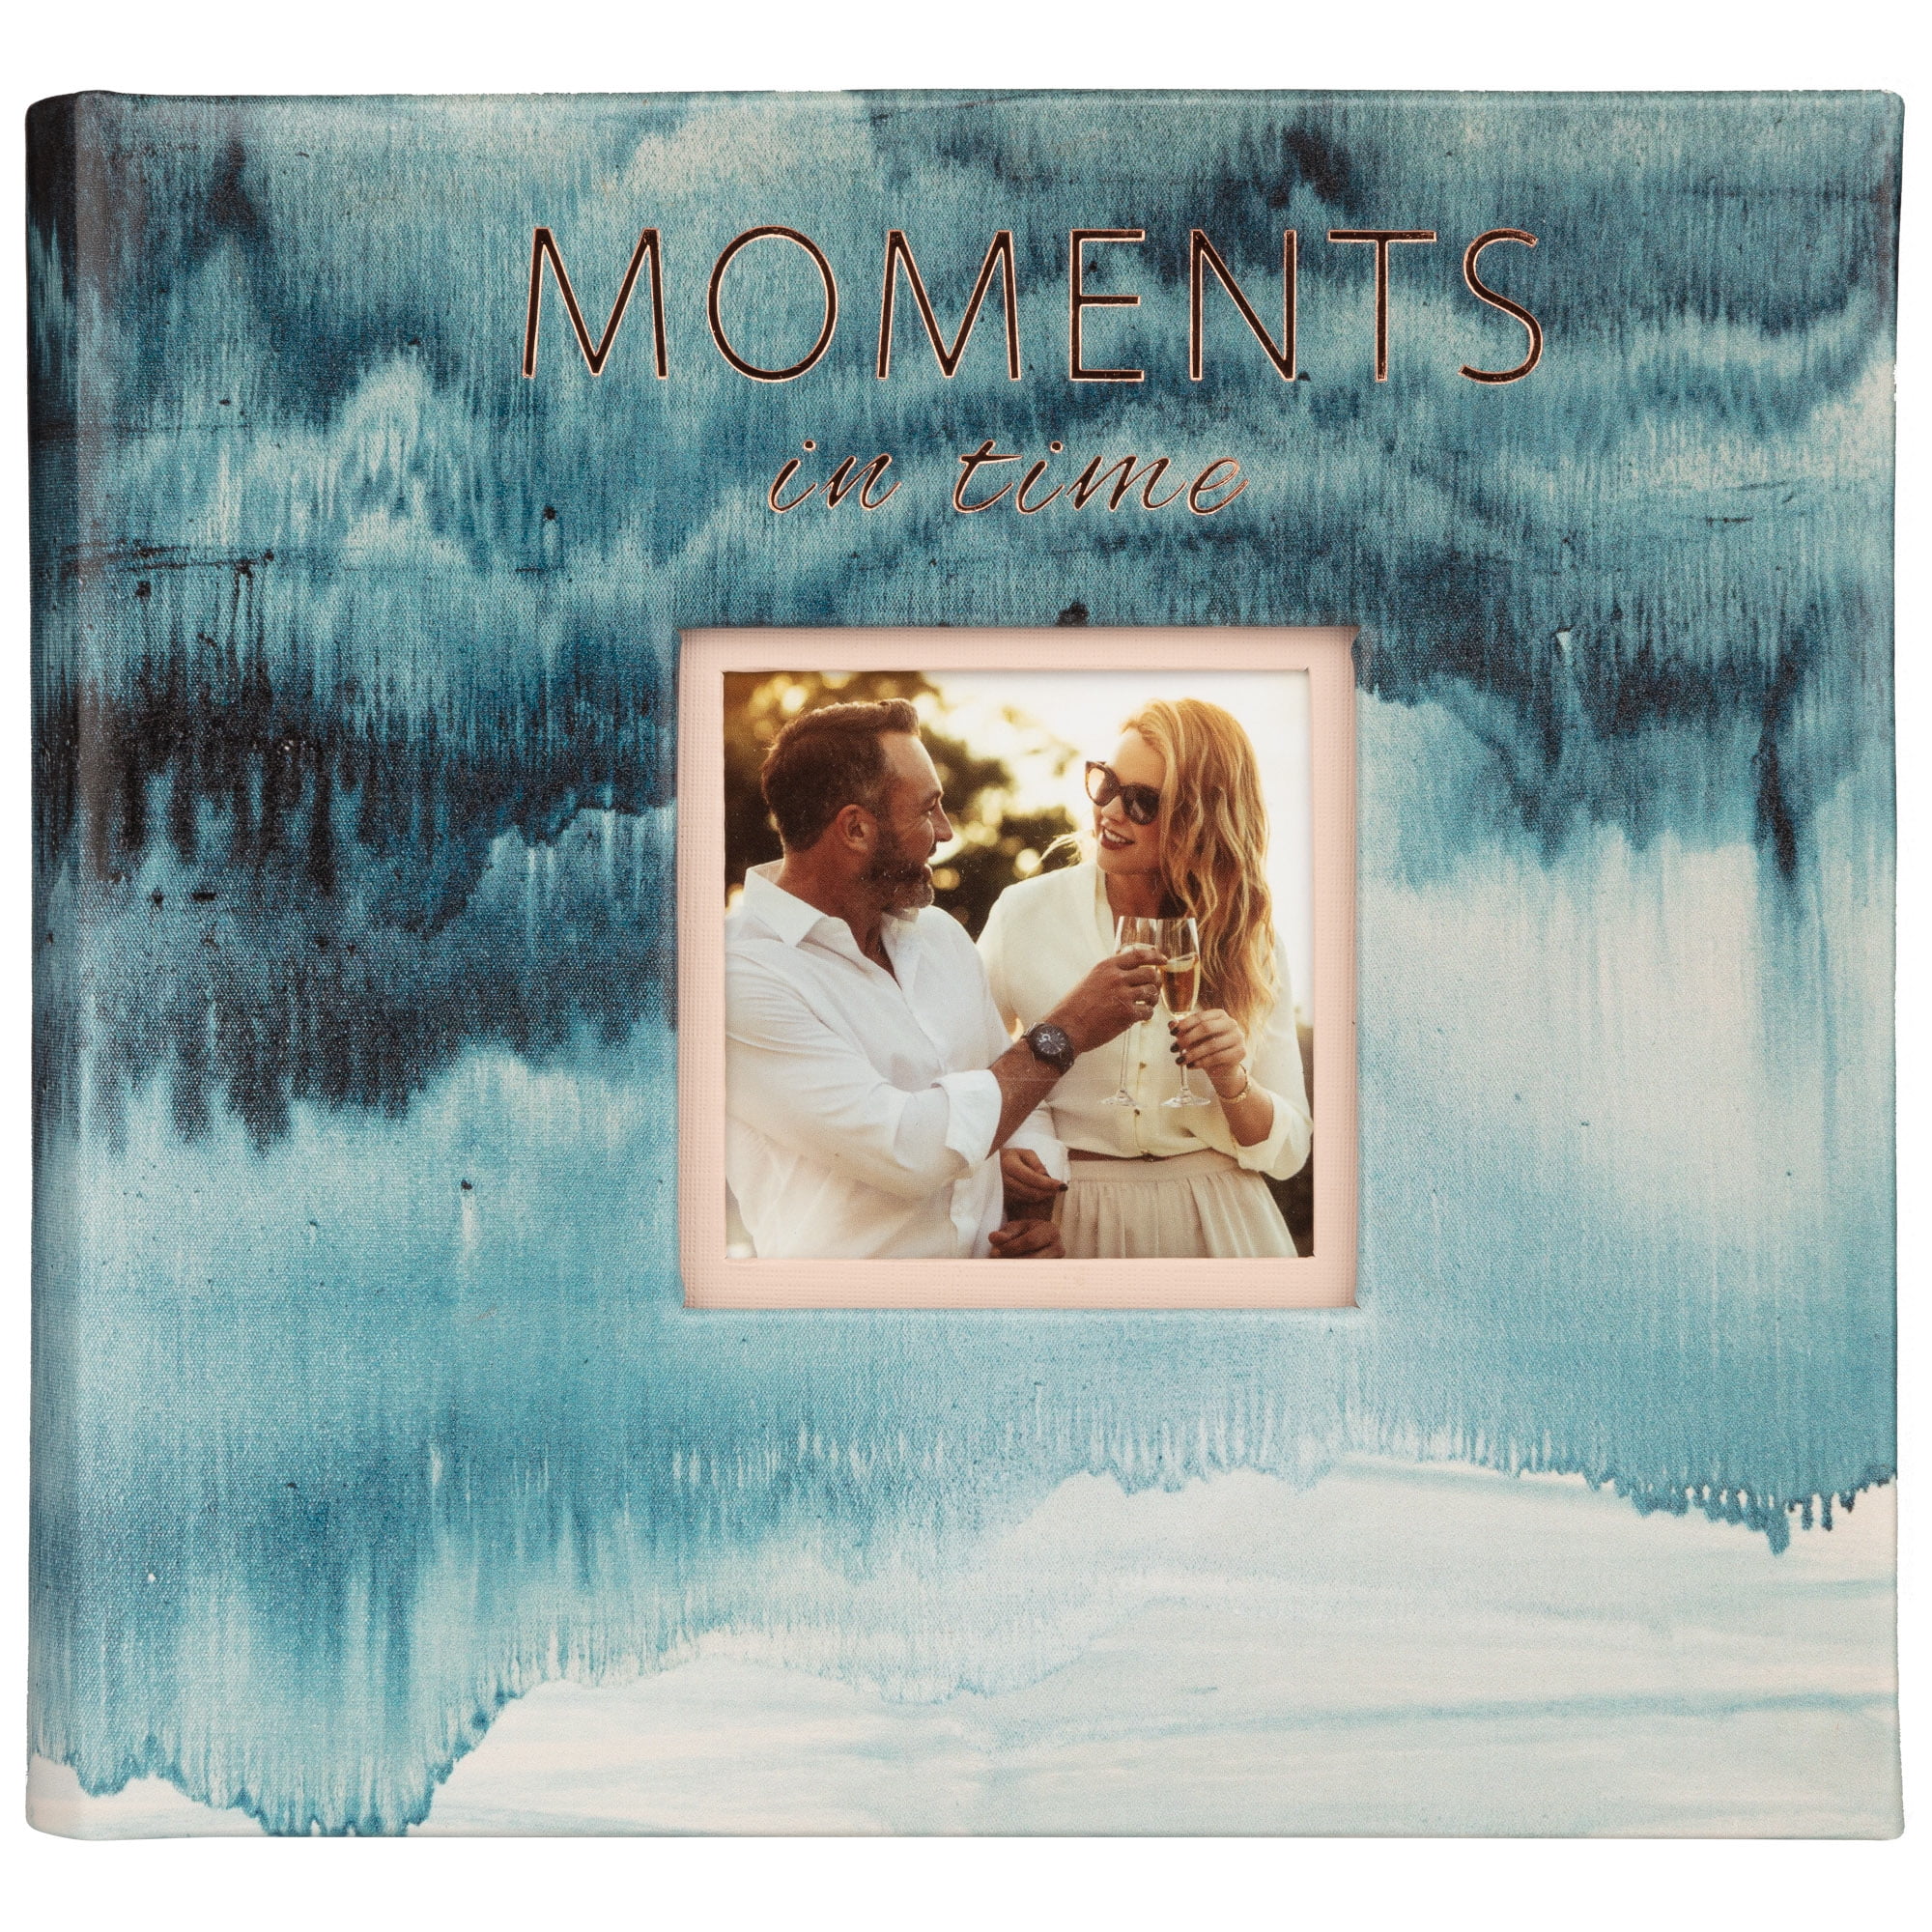 Pinnacle "Moments in Time" Blue Watercolor Photo Album with Rose Gold accents and Frame Front for Picture, 160 page count